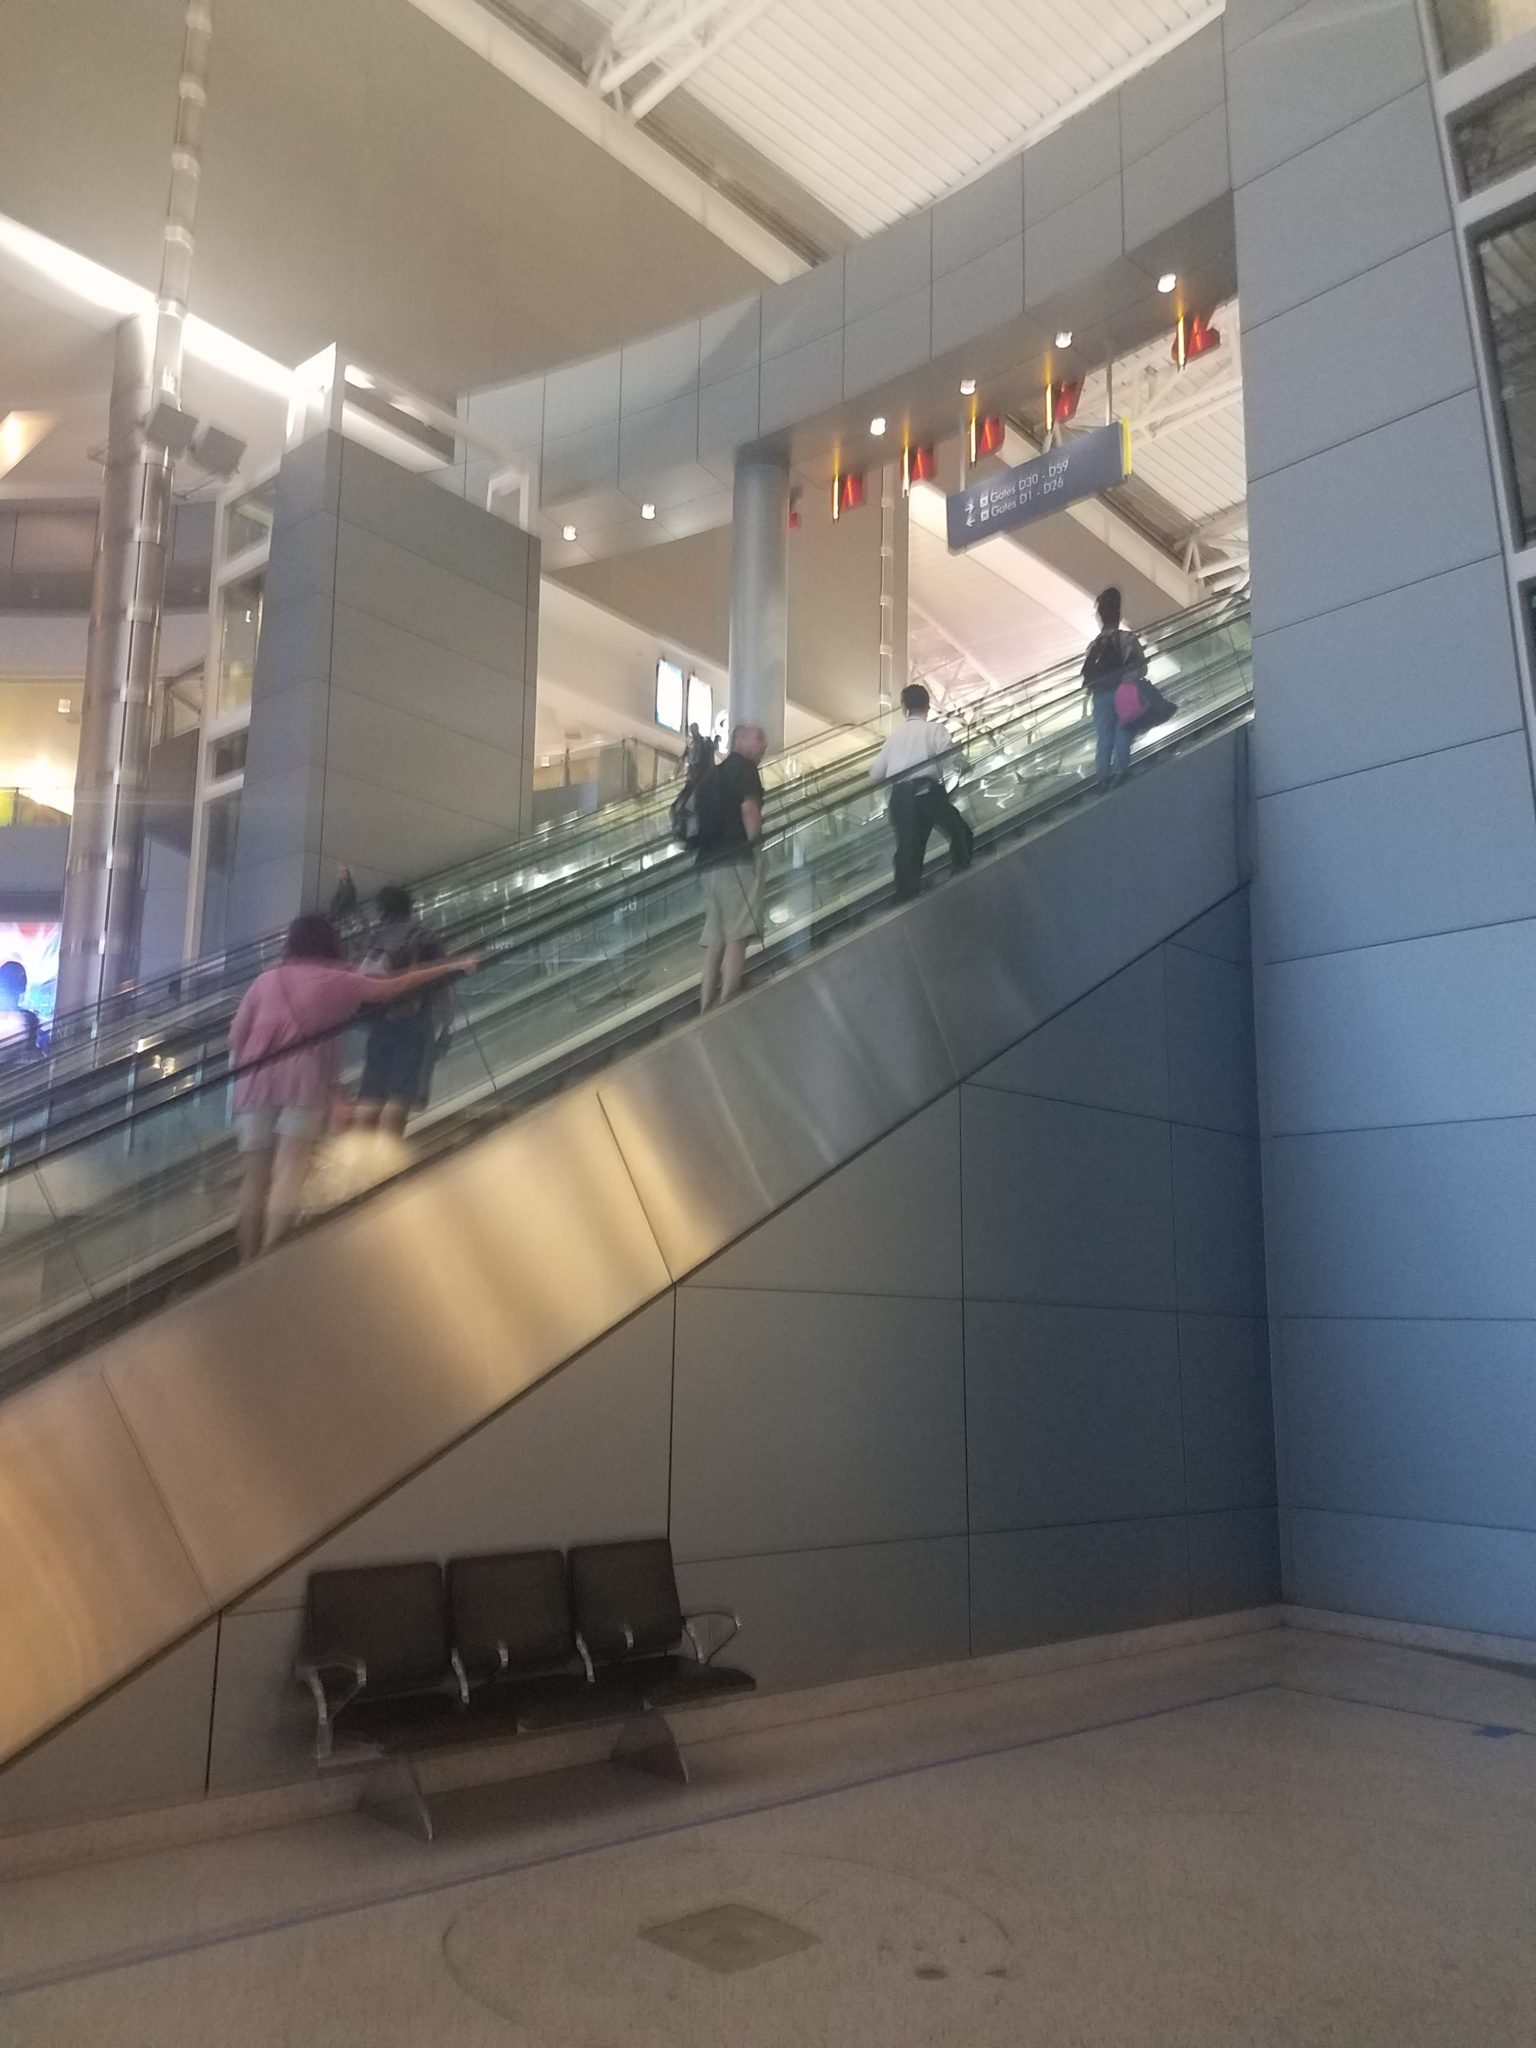 people on an escalator in a building